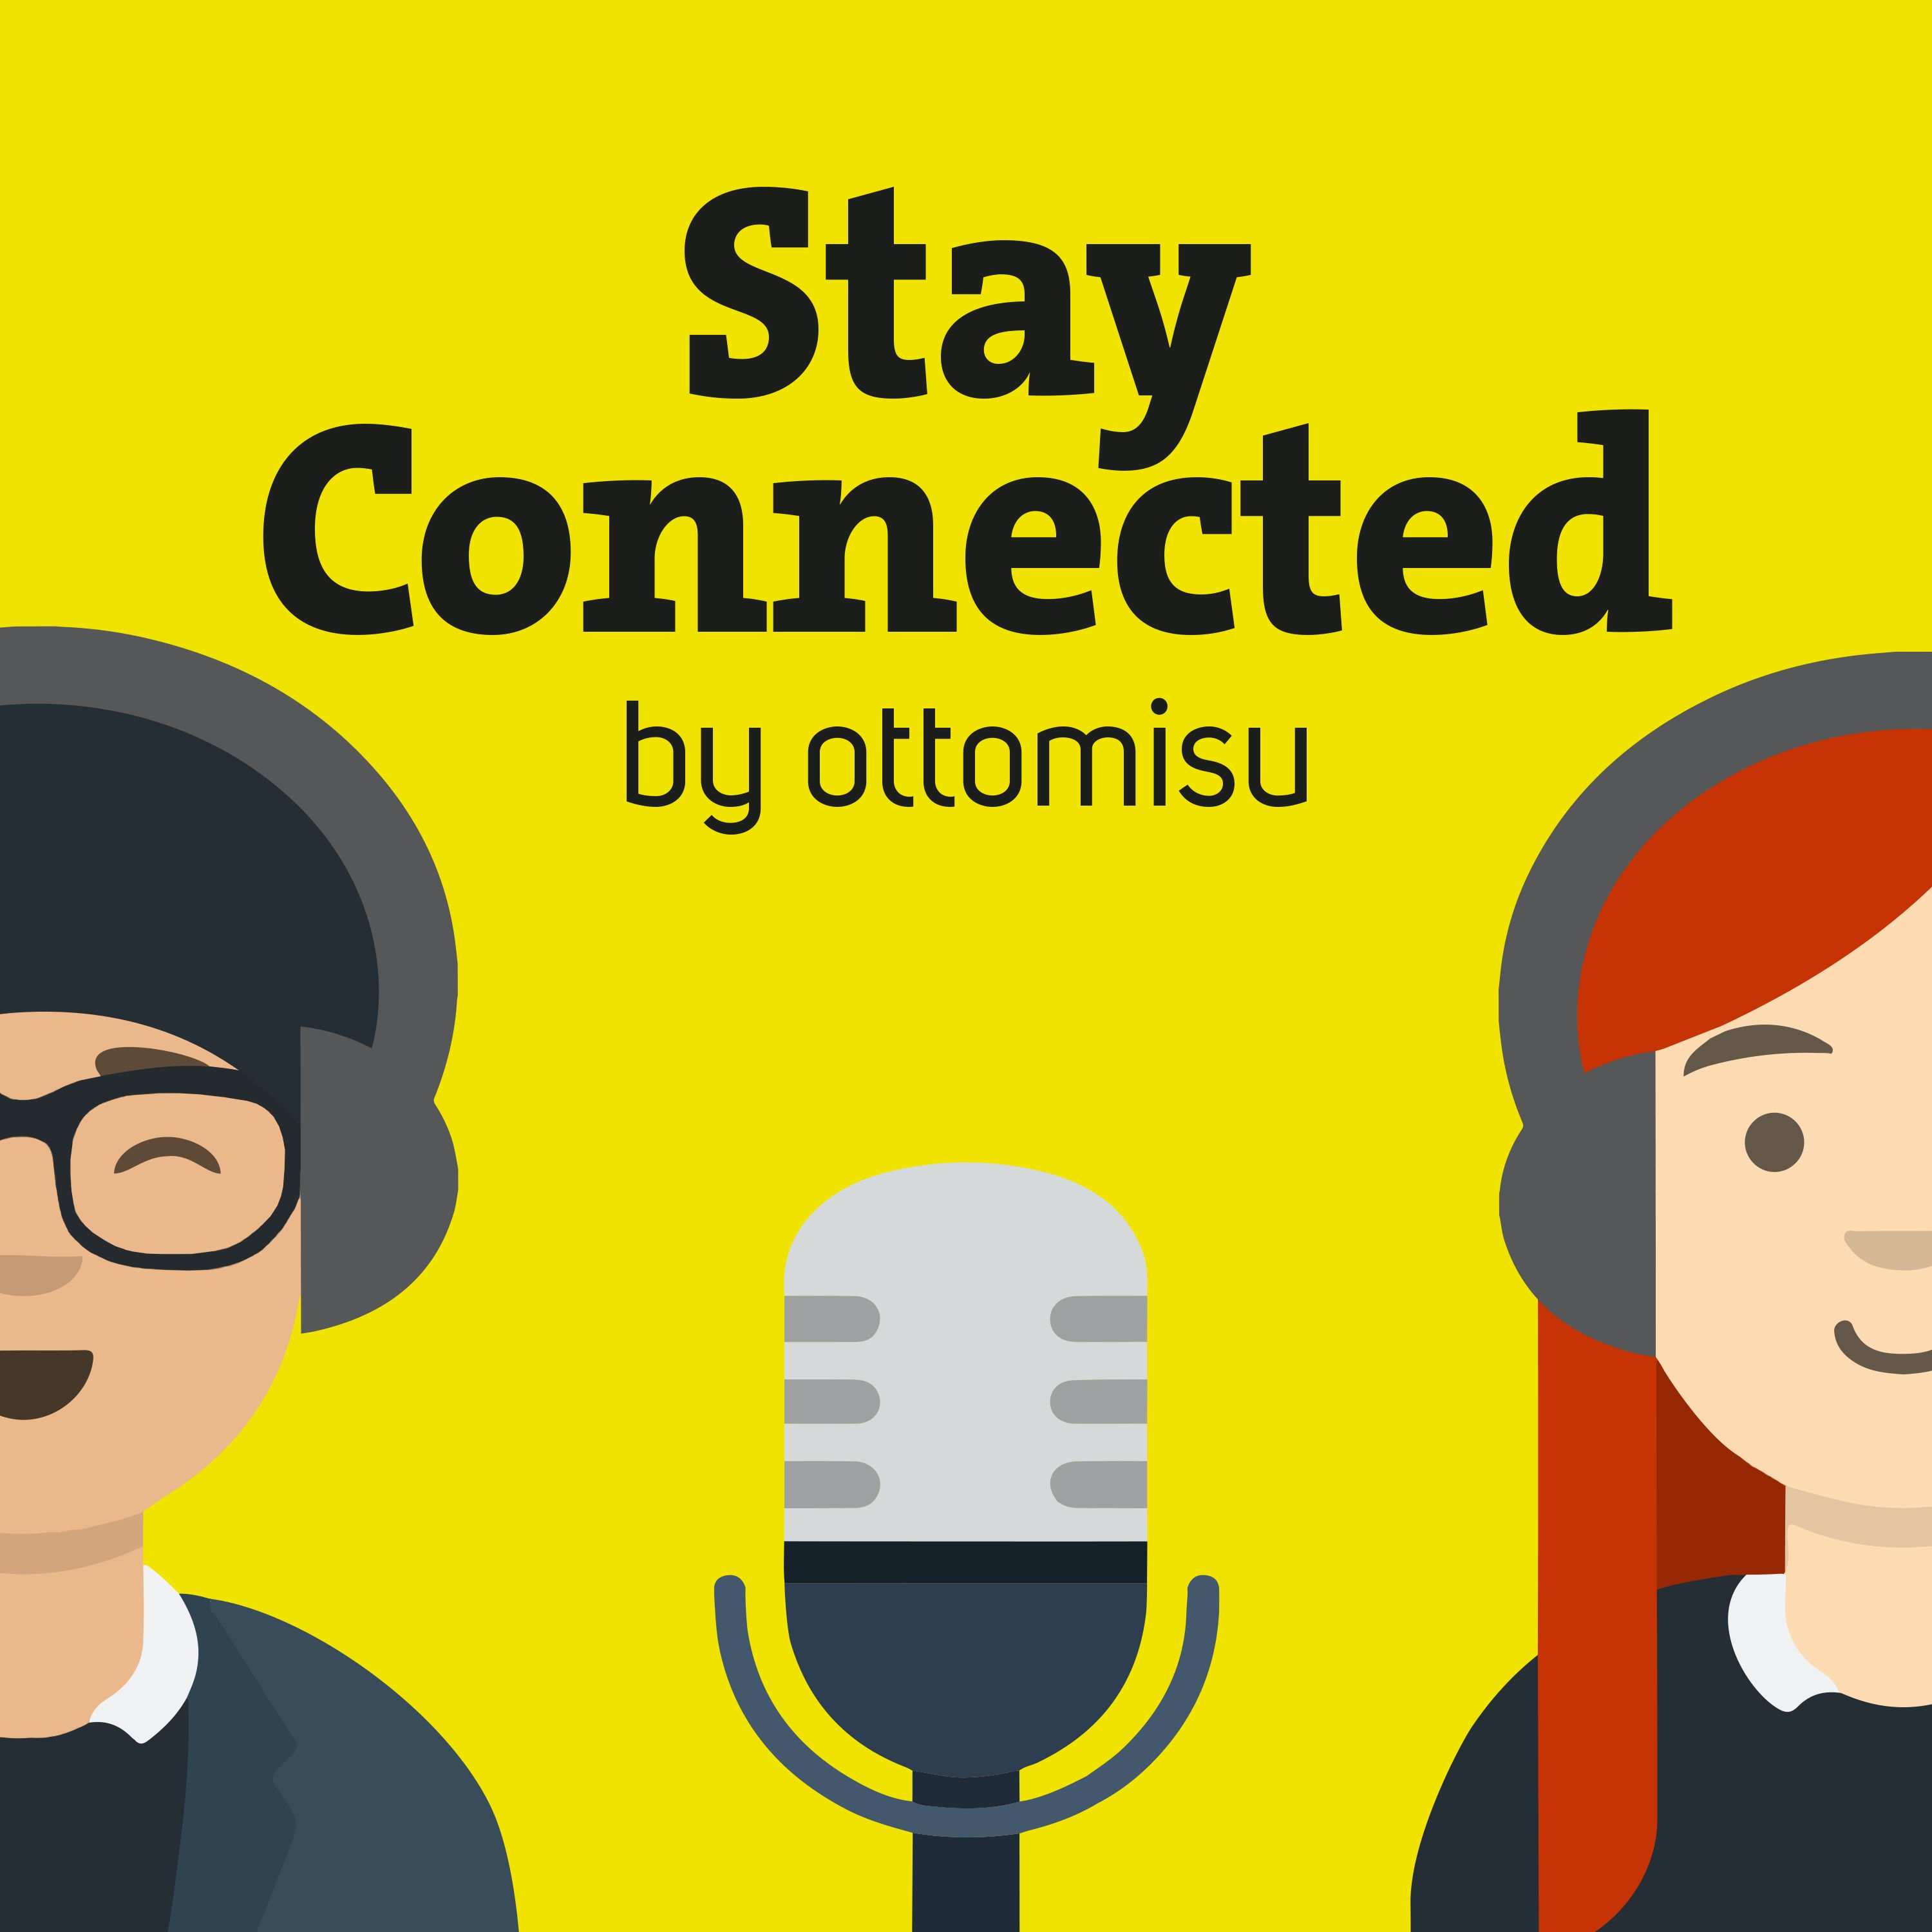 Stay Connected by ottomisu